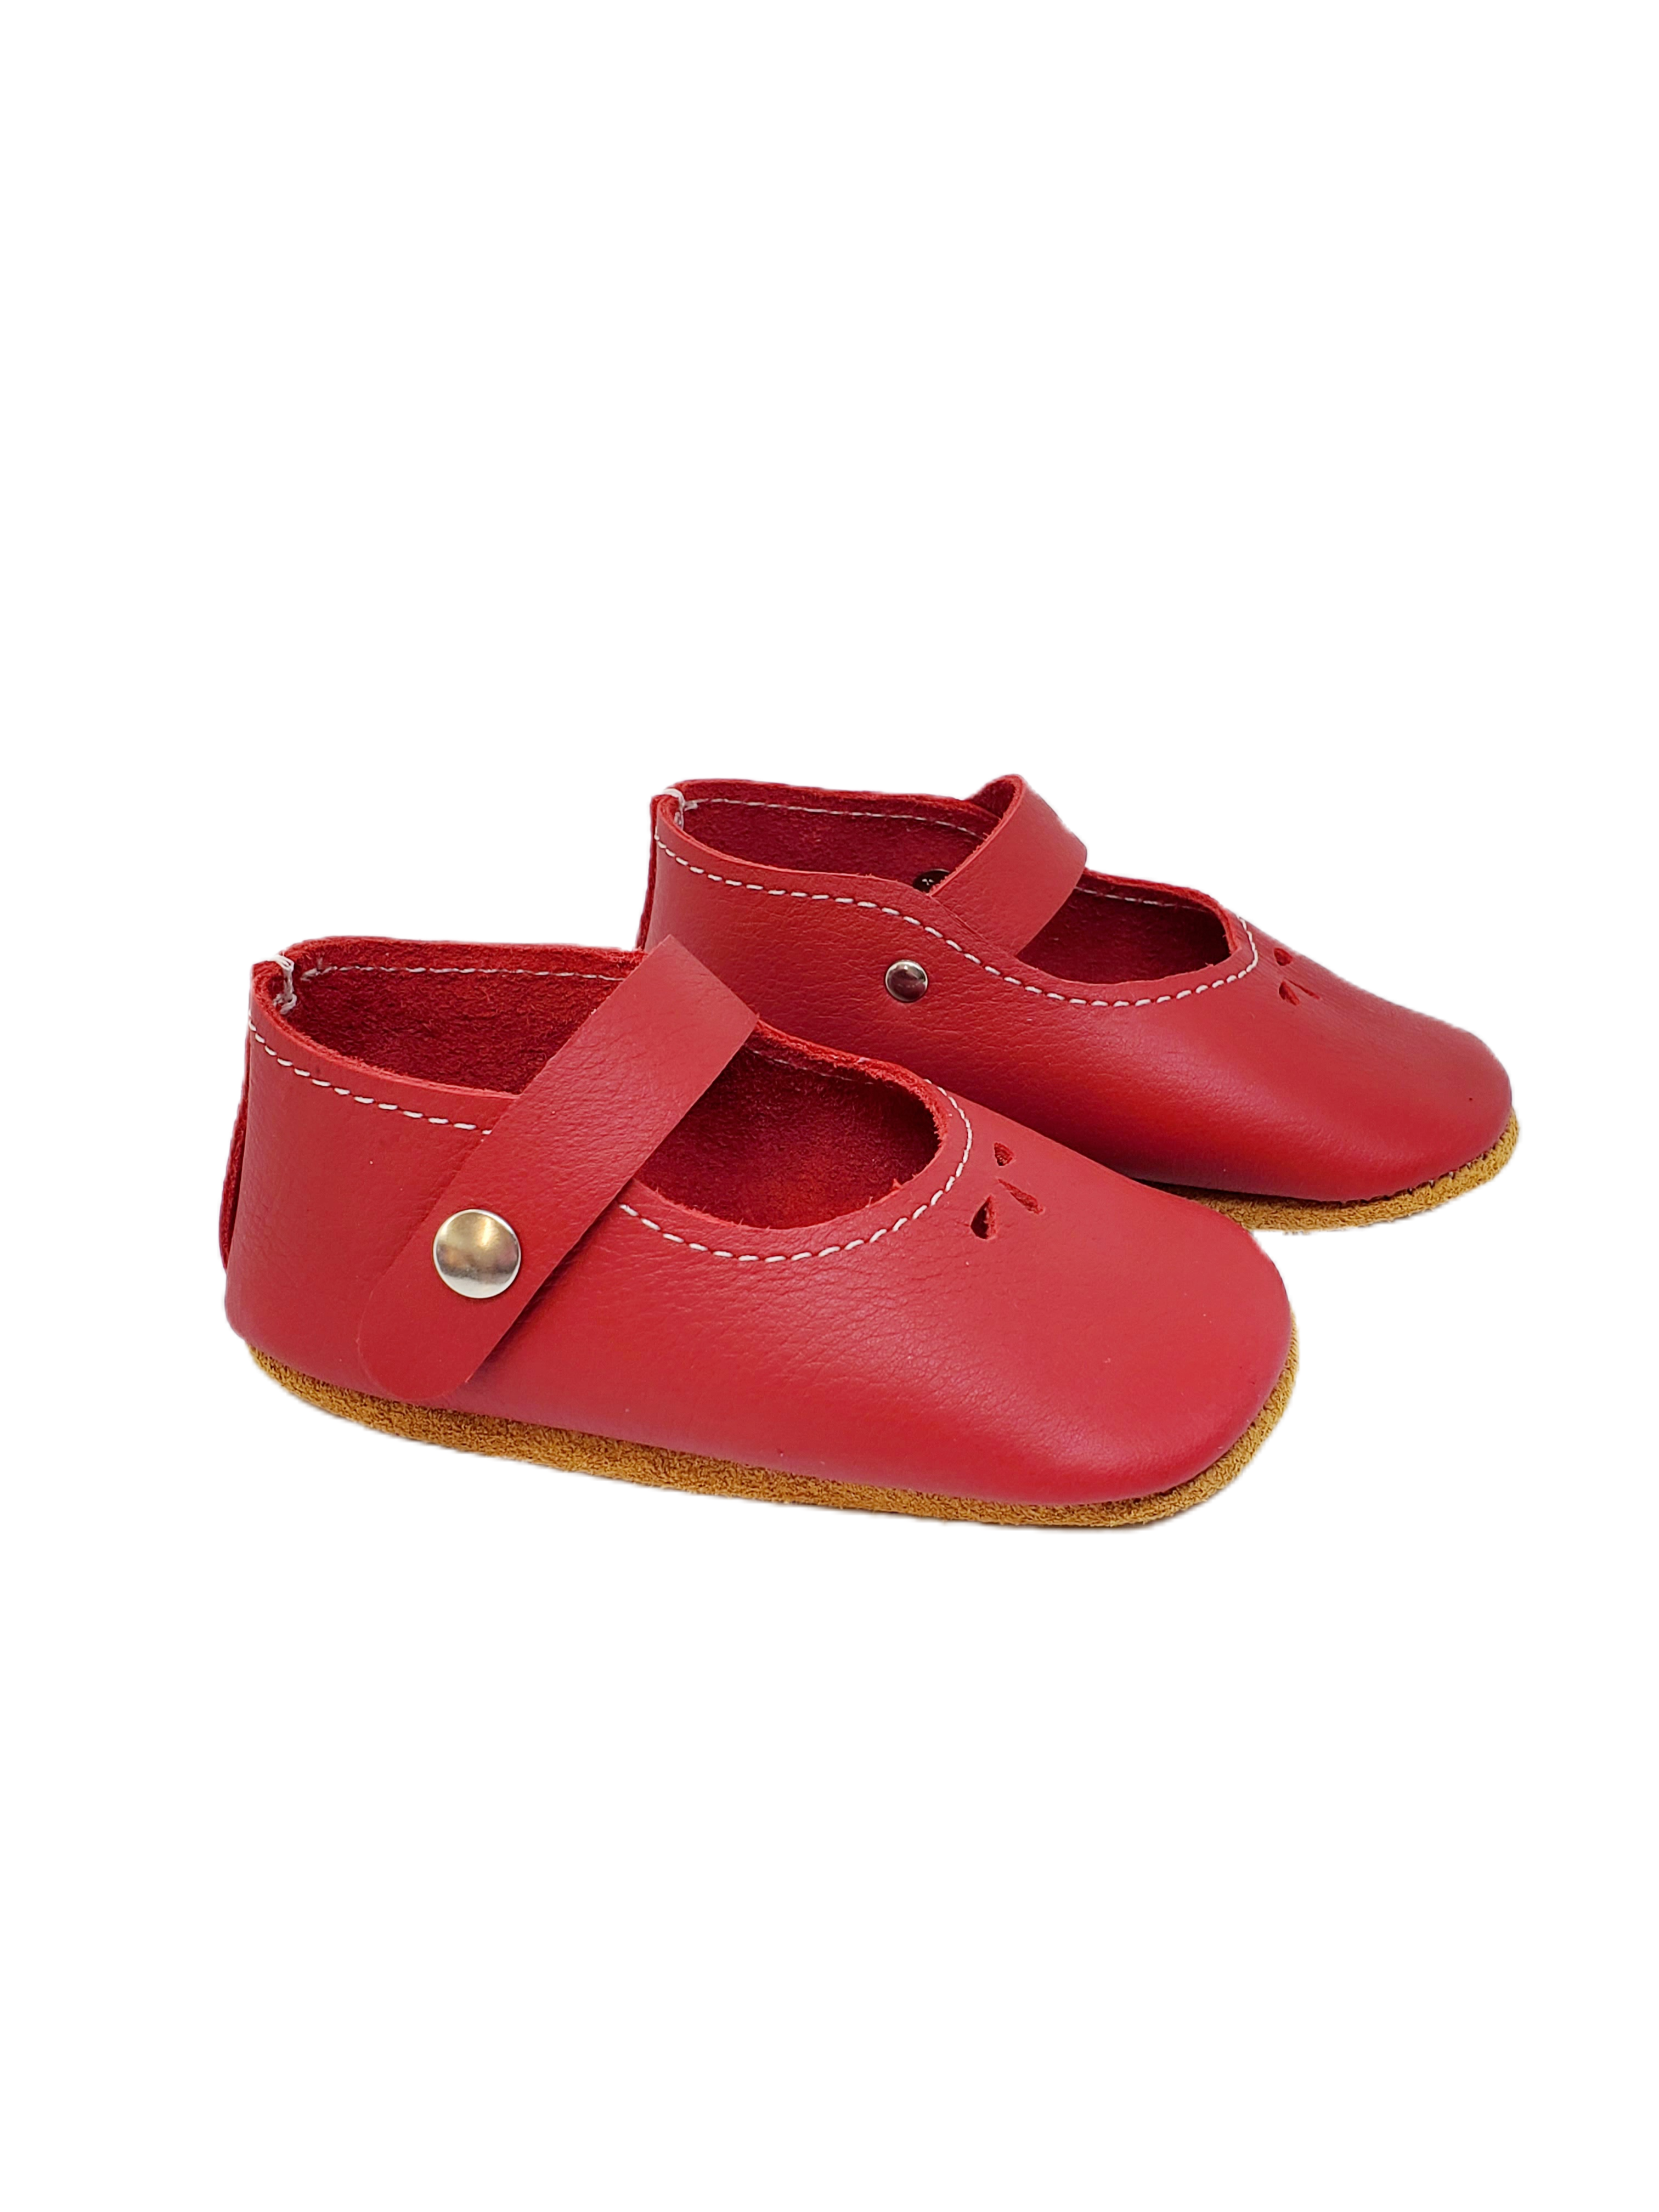 Christmas Red Mary Janes